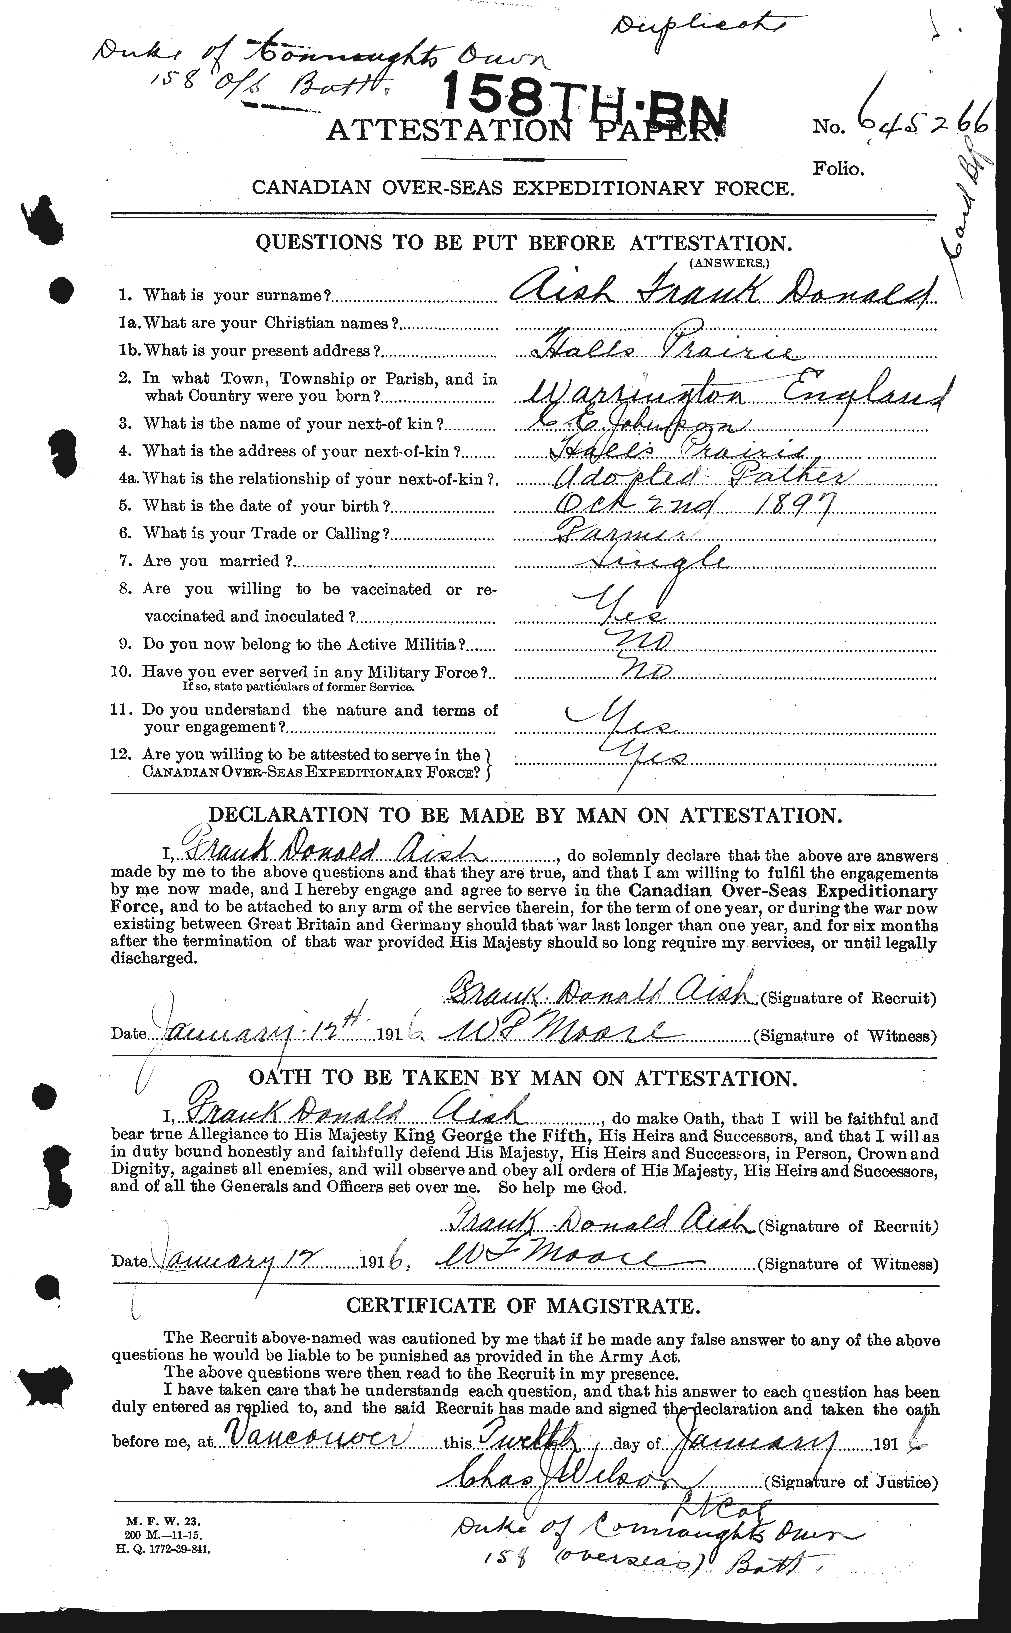 Personnel Records of the First World War - CEF 203097a